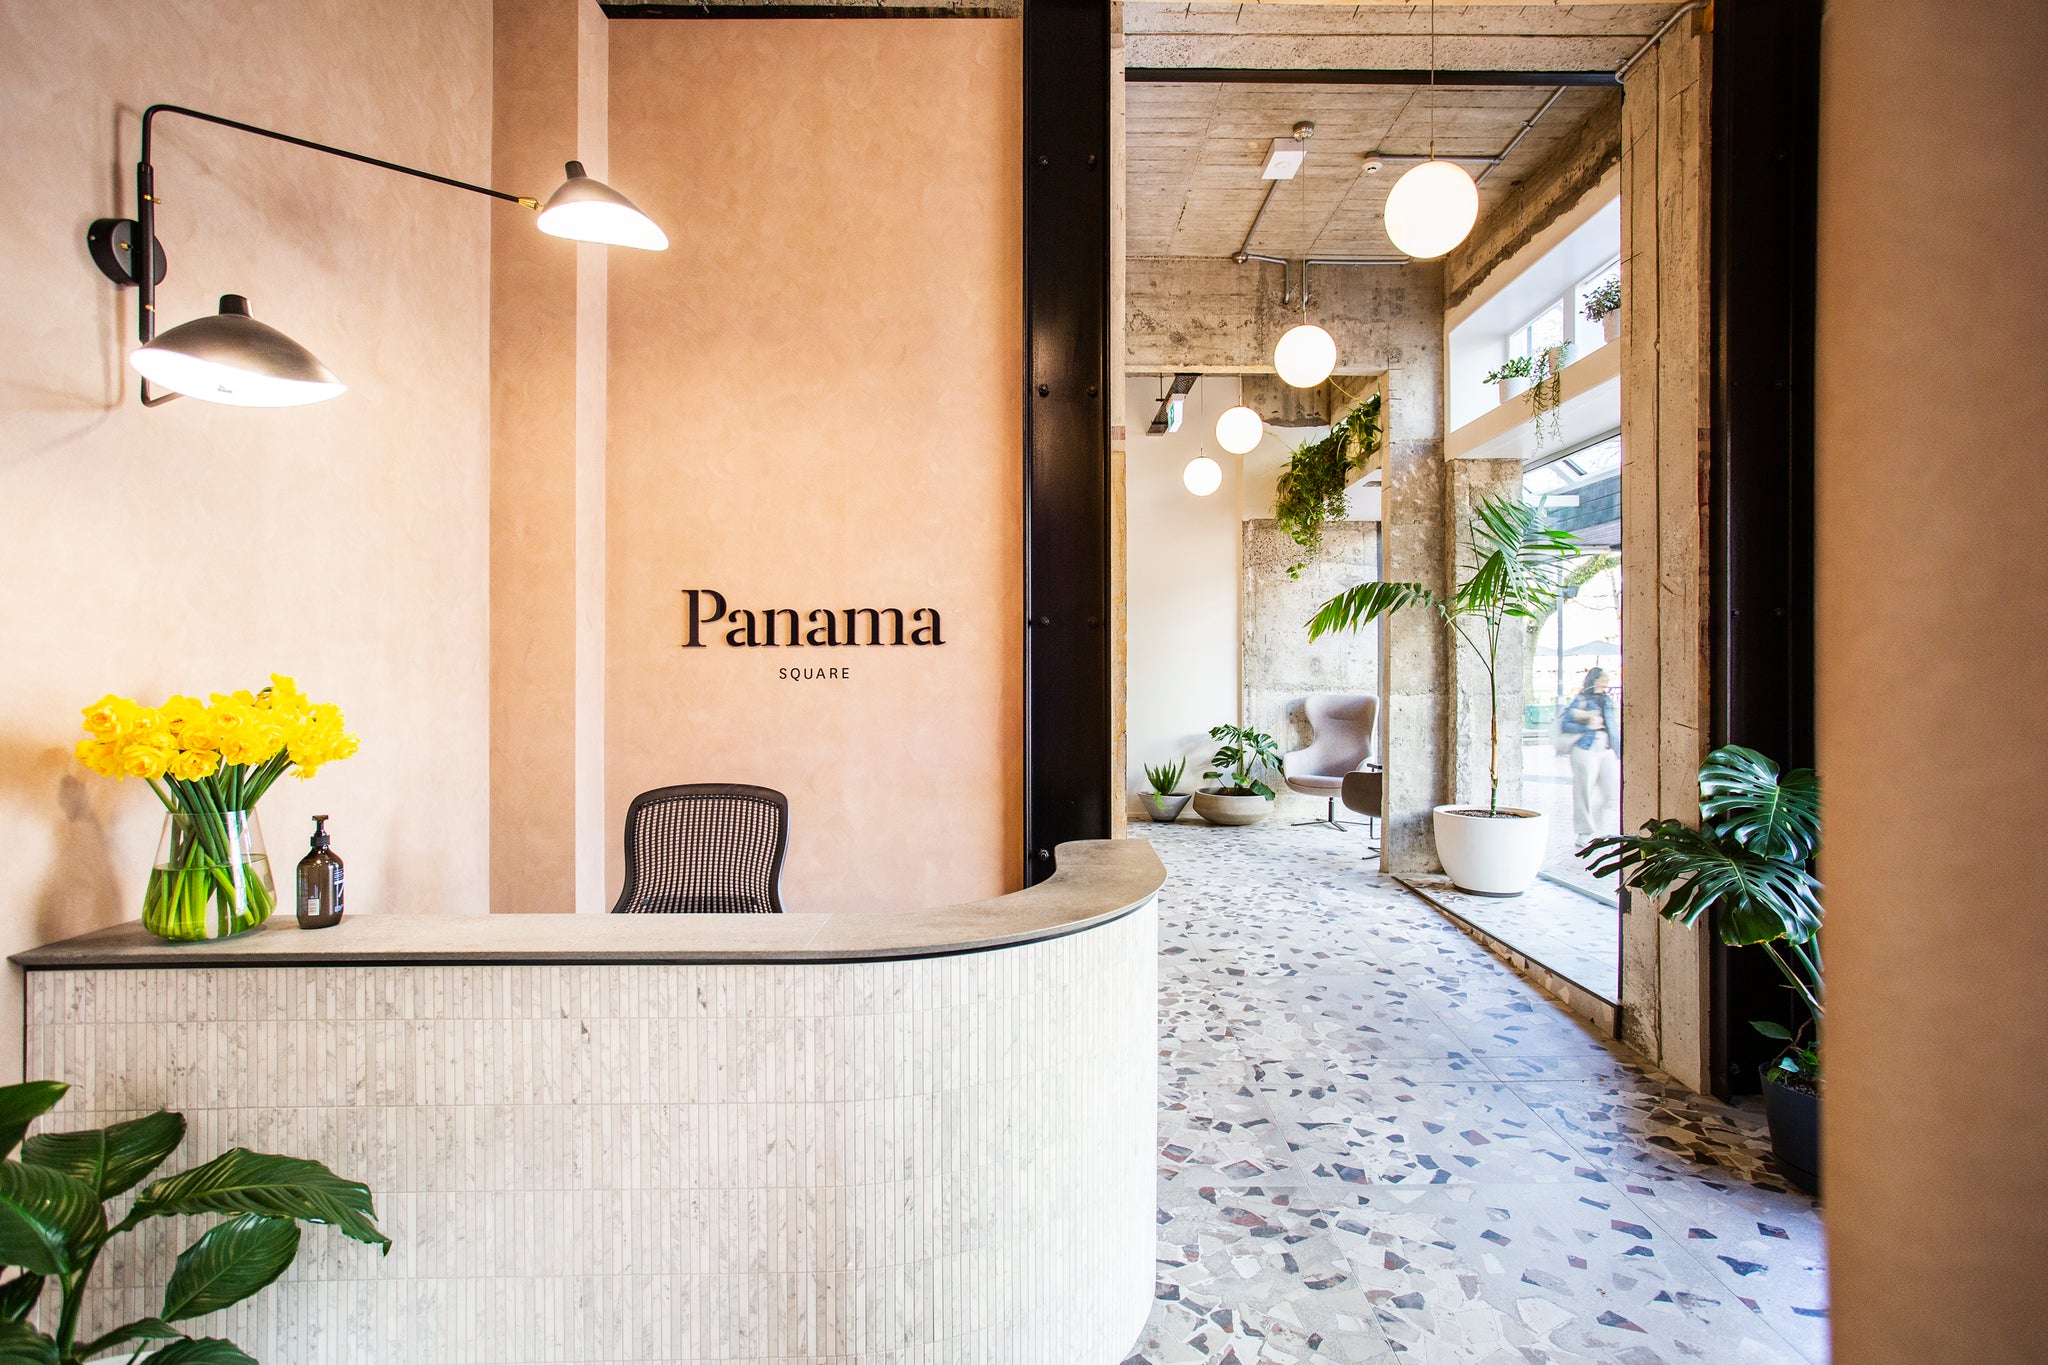 Work in style at Panama